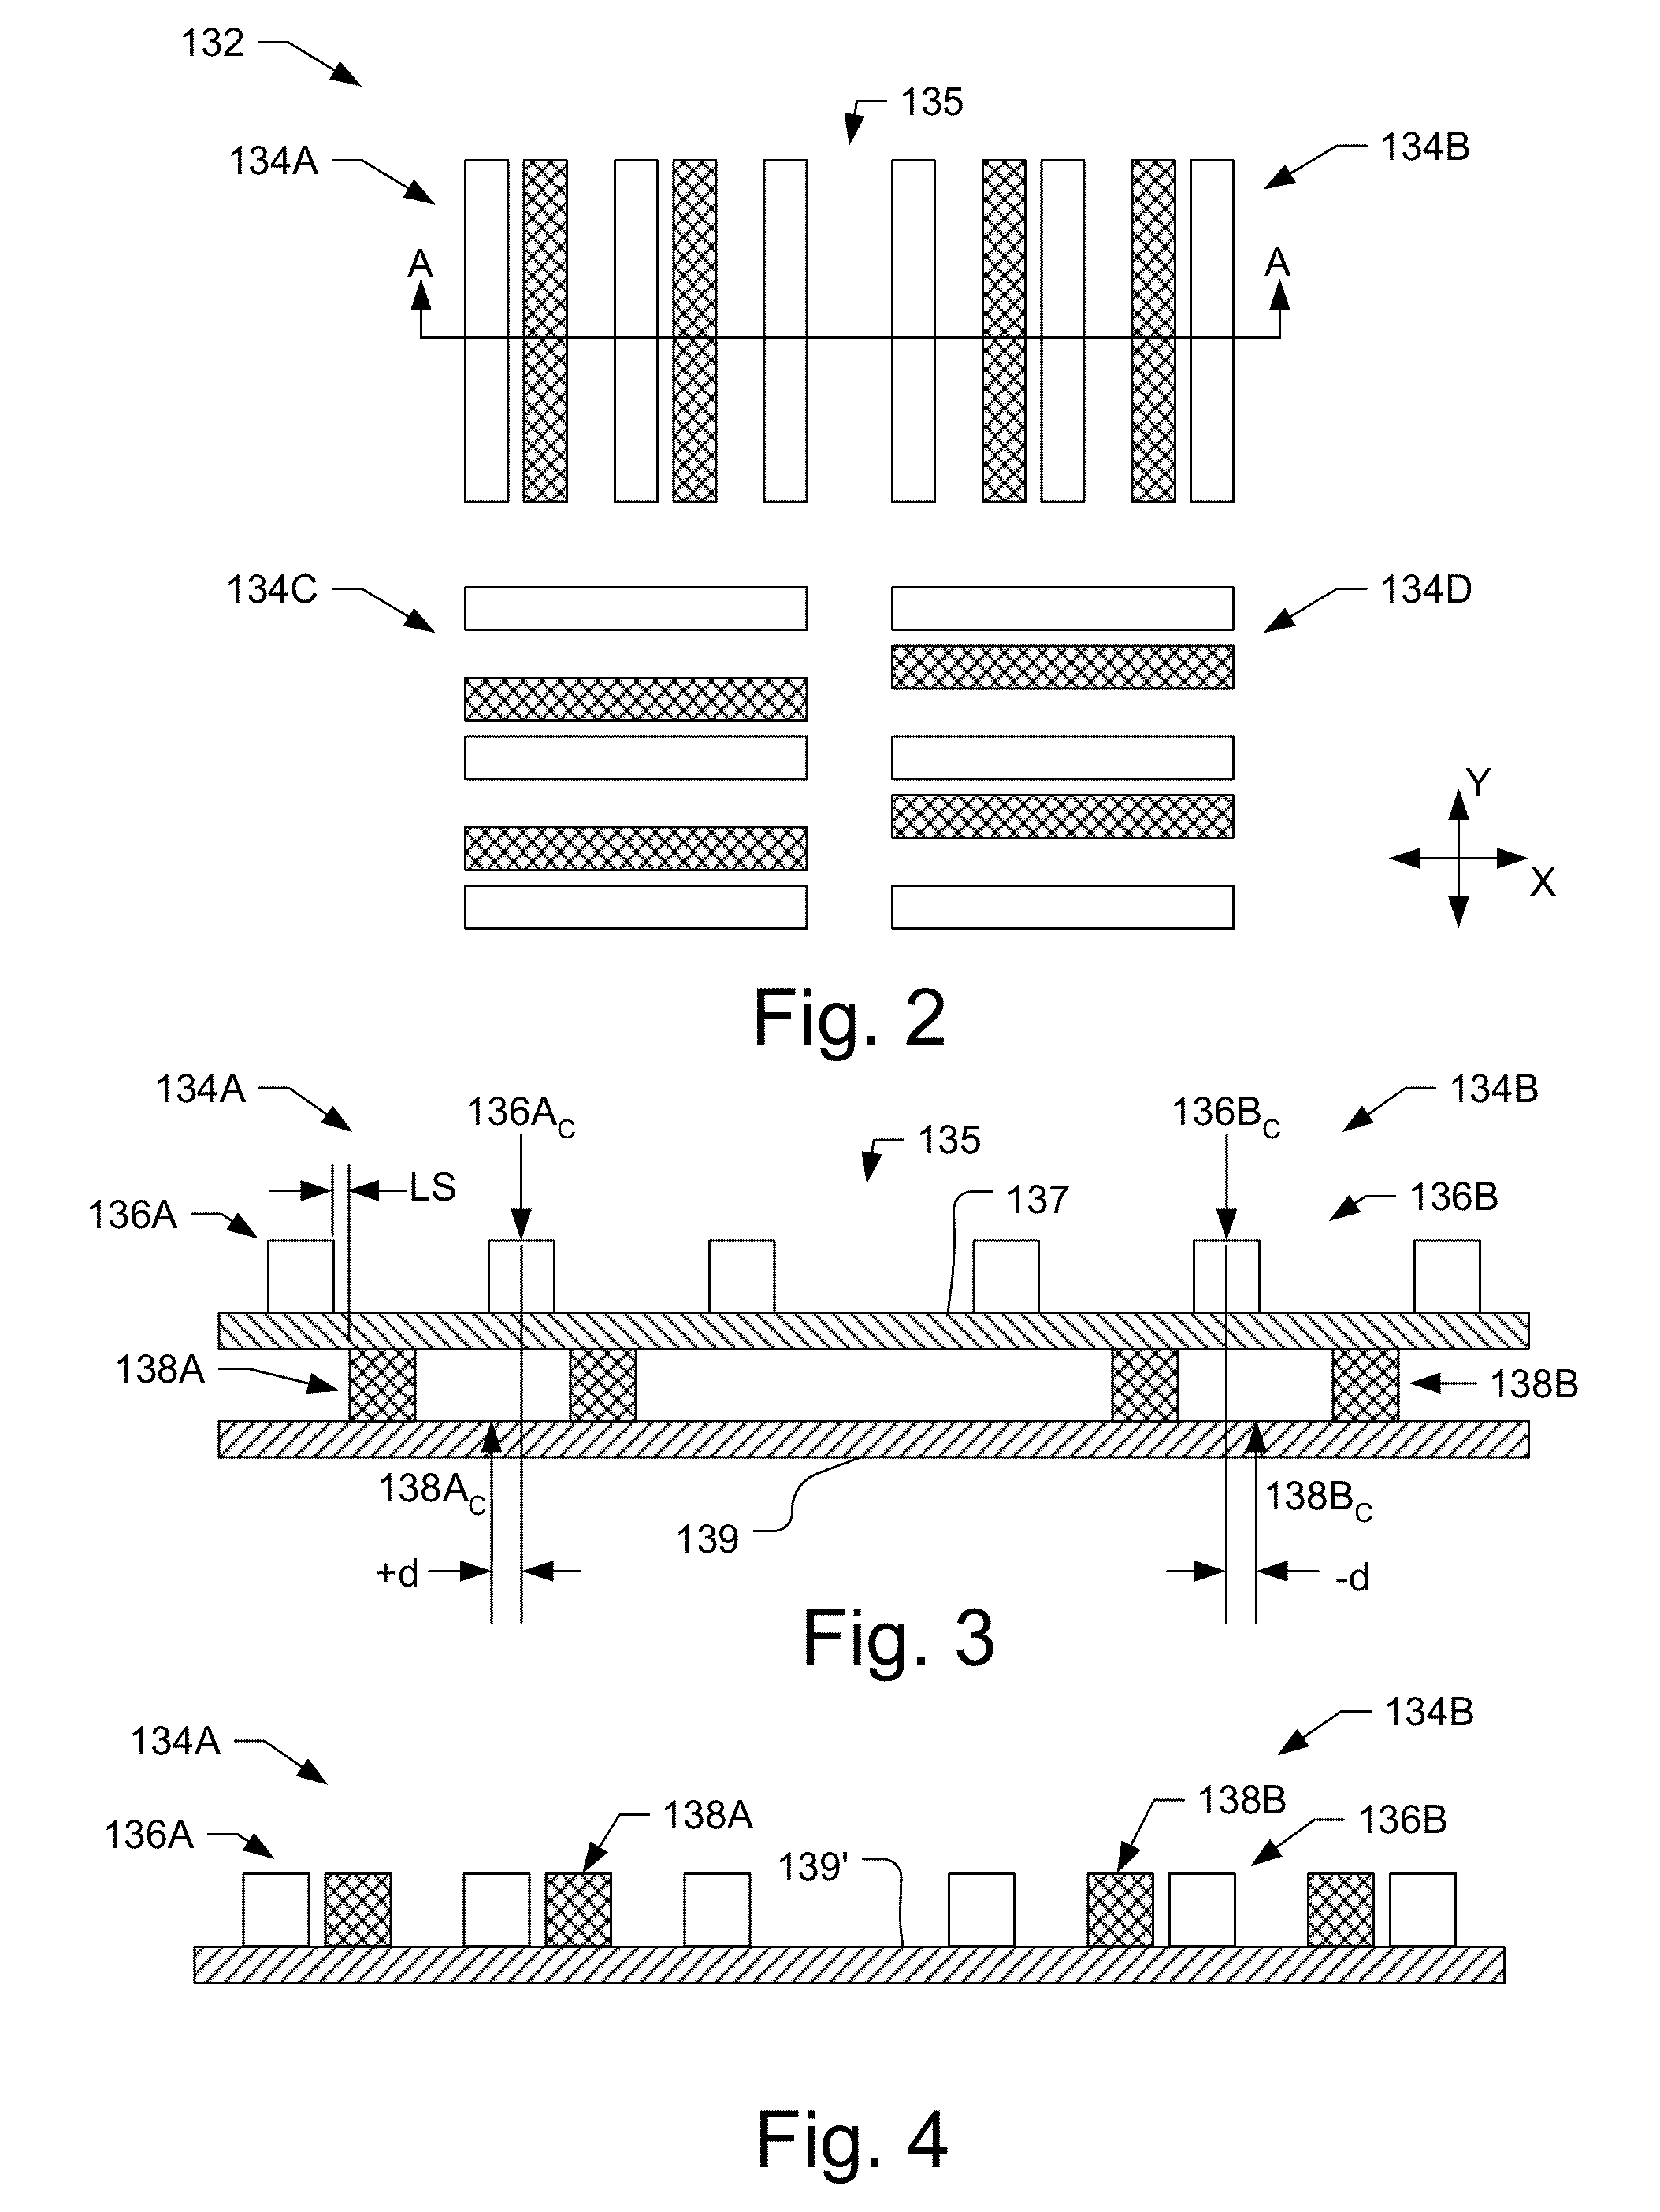 Image based overlay measurement with finite gratings